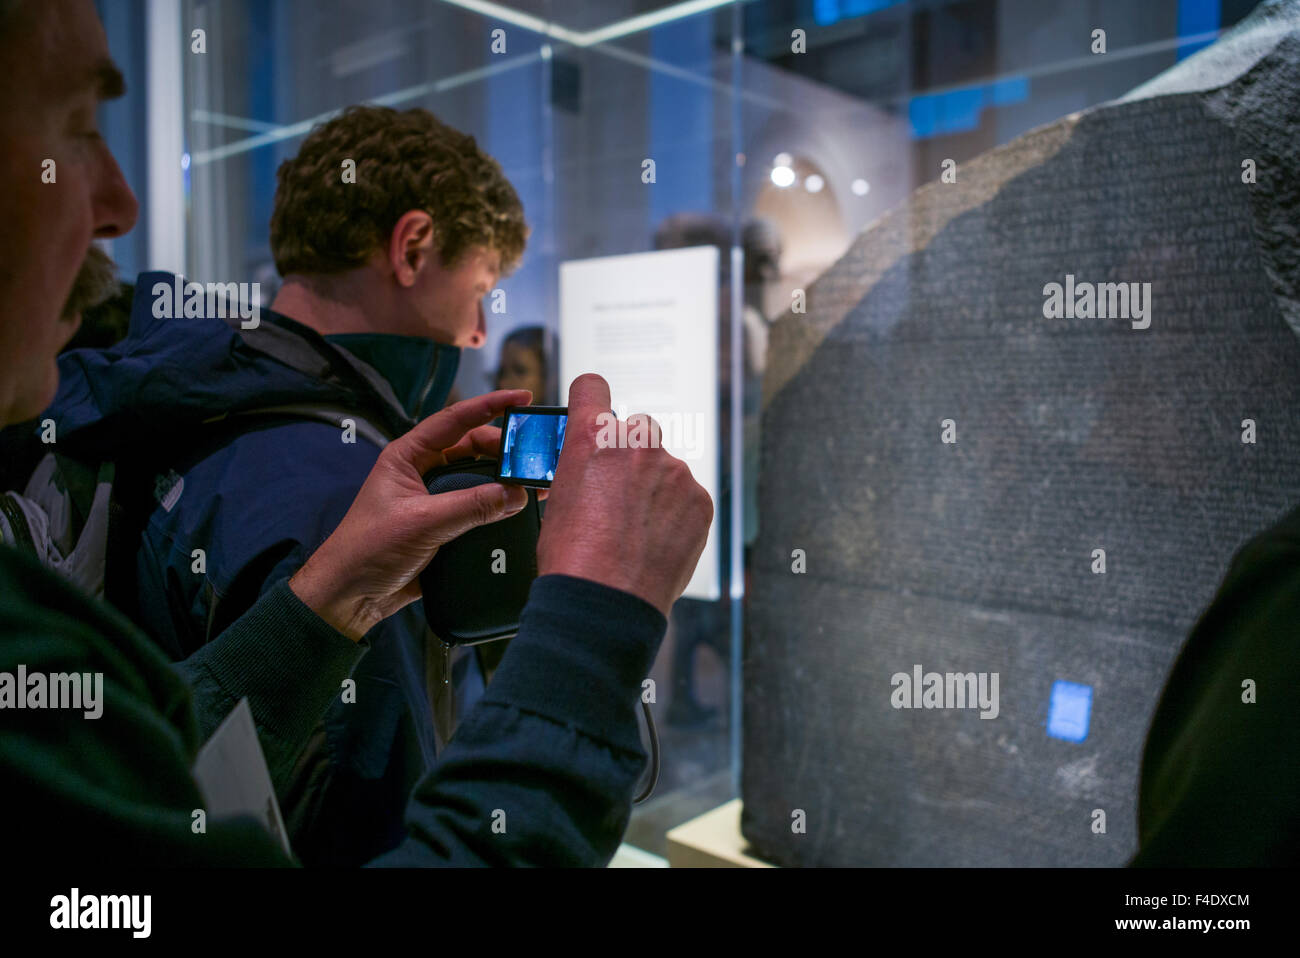 England, London, Bloomsbury, British Museum, Egyptian Room, Rosetta Stone, its discovery allowed the deciphering of the ancient Egyptian alphabet, being photographed by cell phone Stock Photo